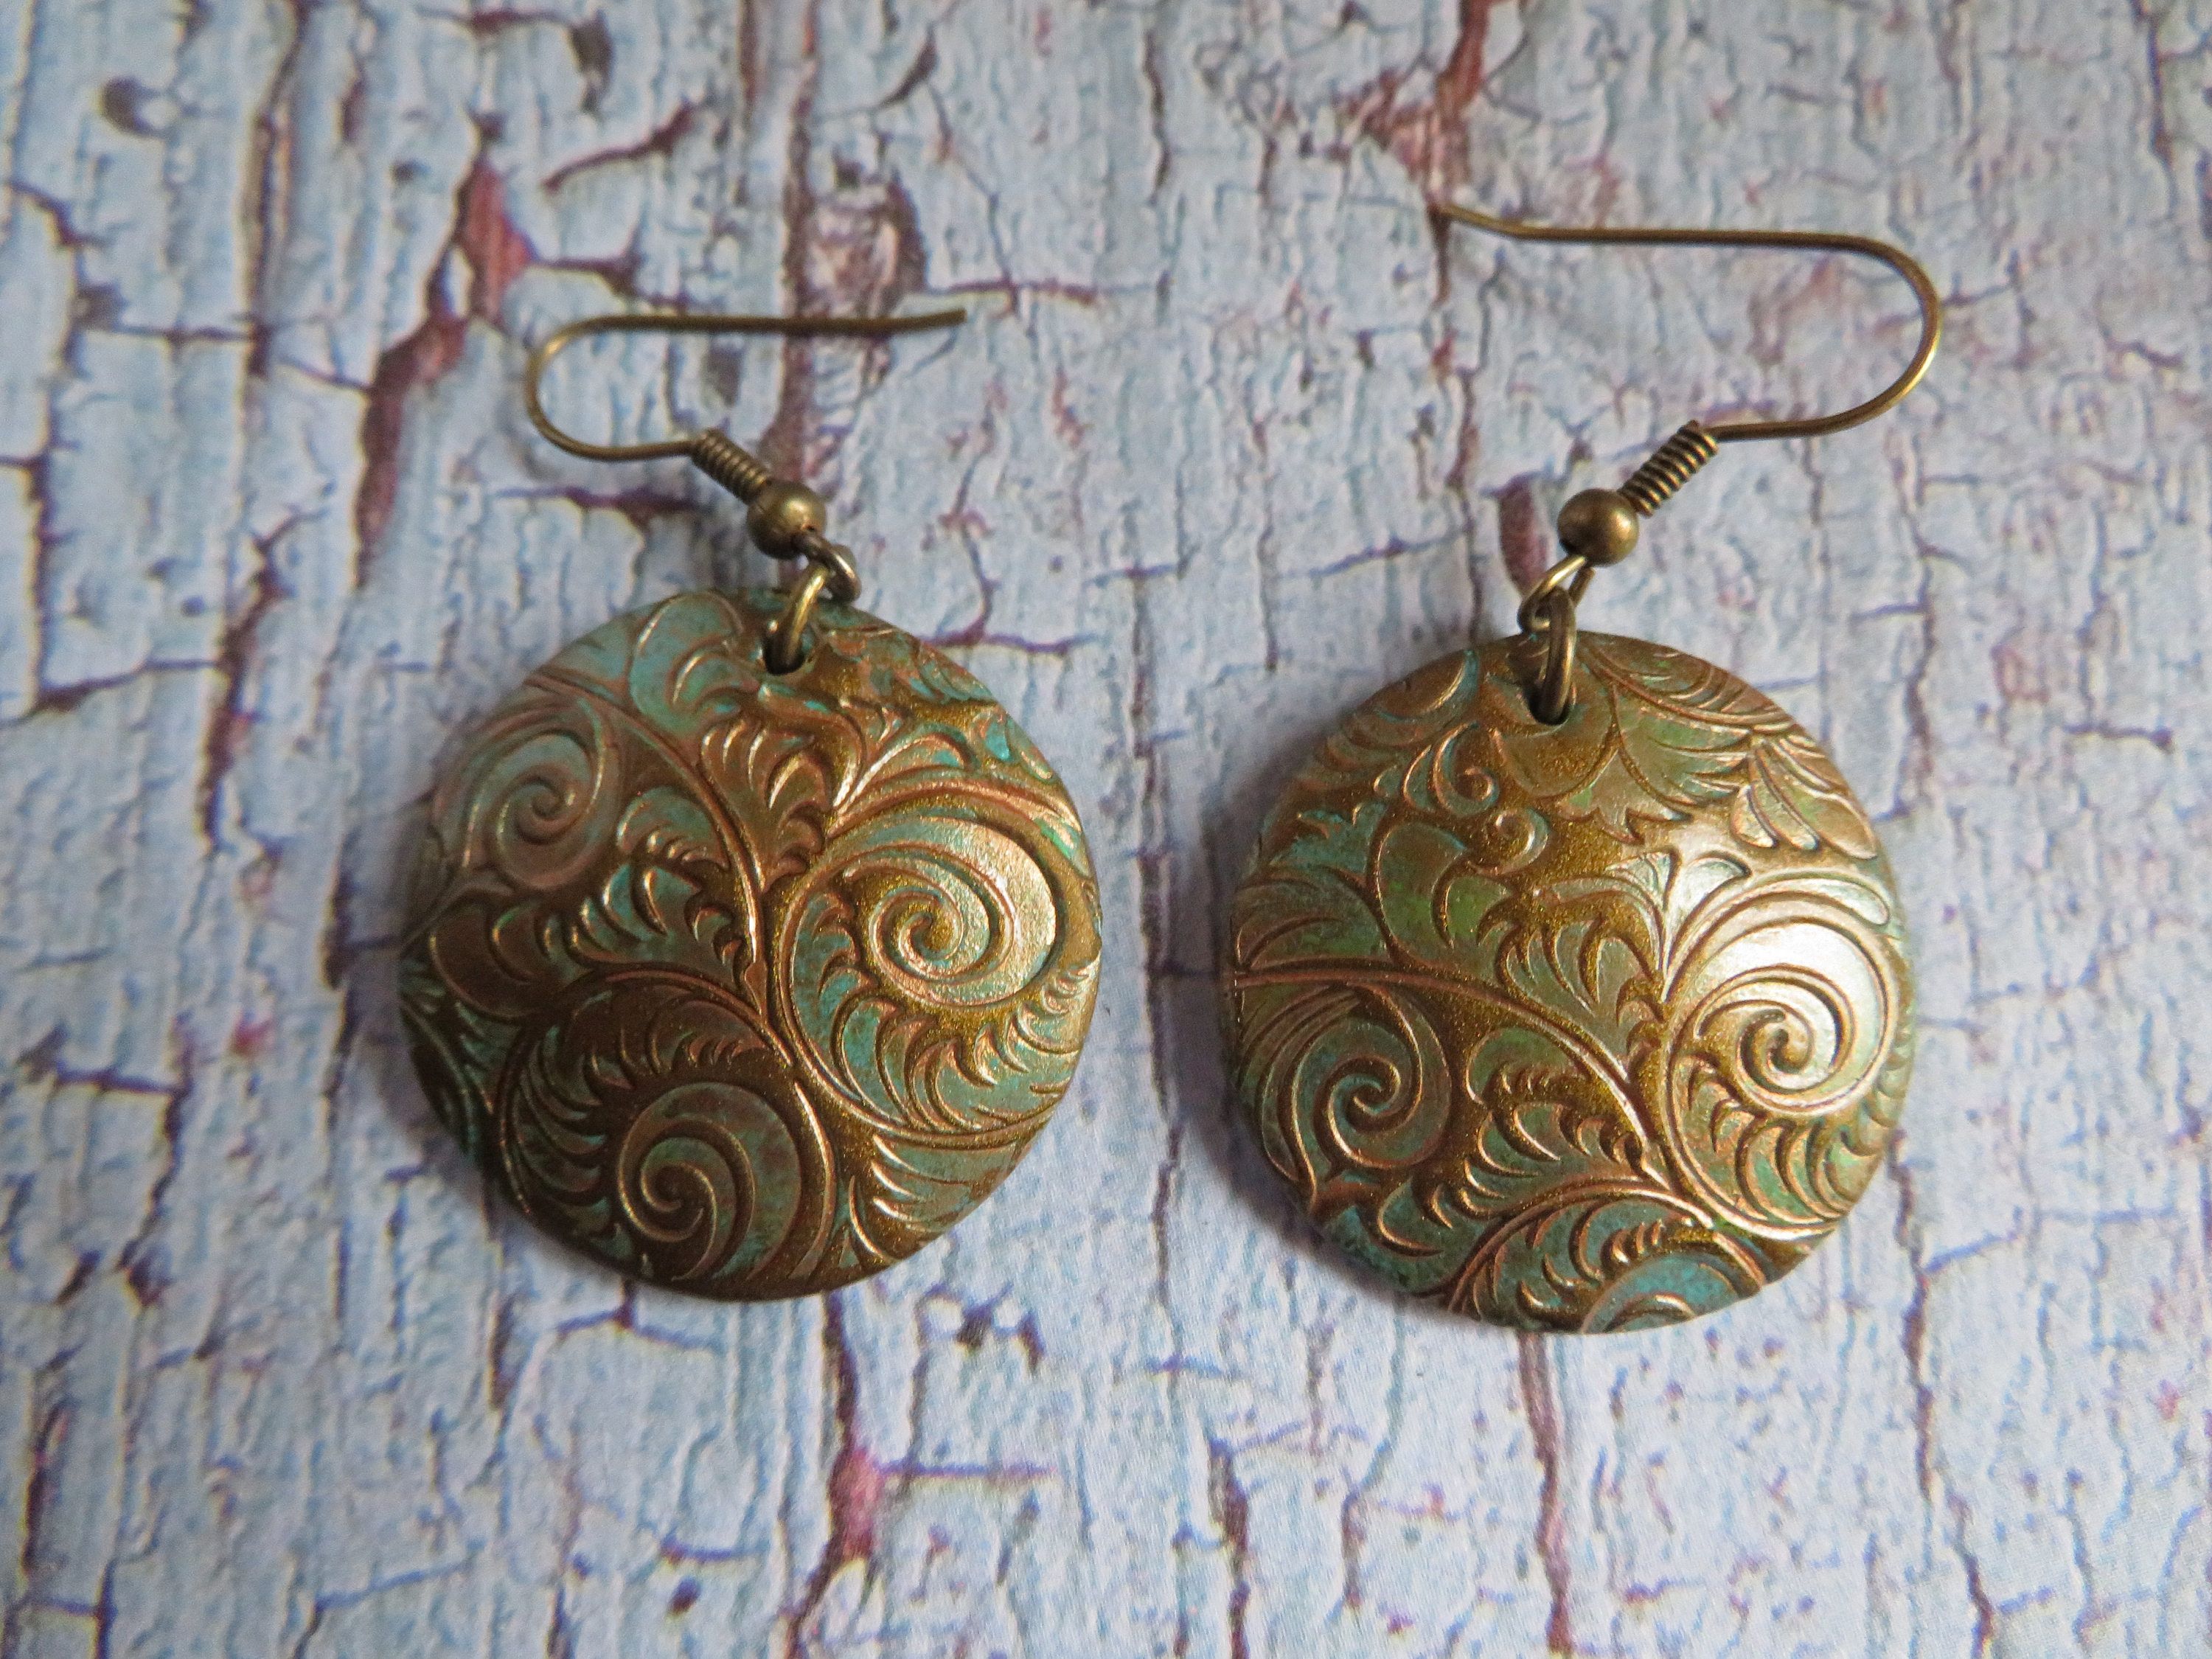 Antique Gold Imitation Earrings, Floral Swirls Polymer Clay Earrings ...